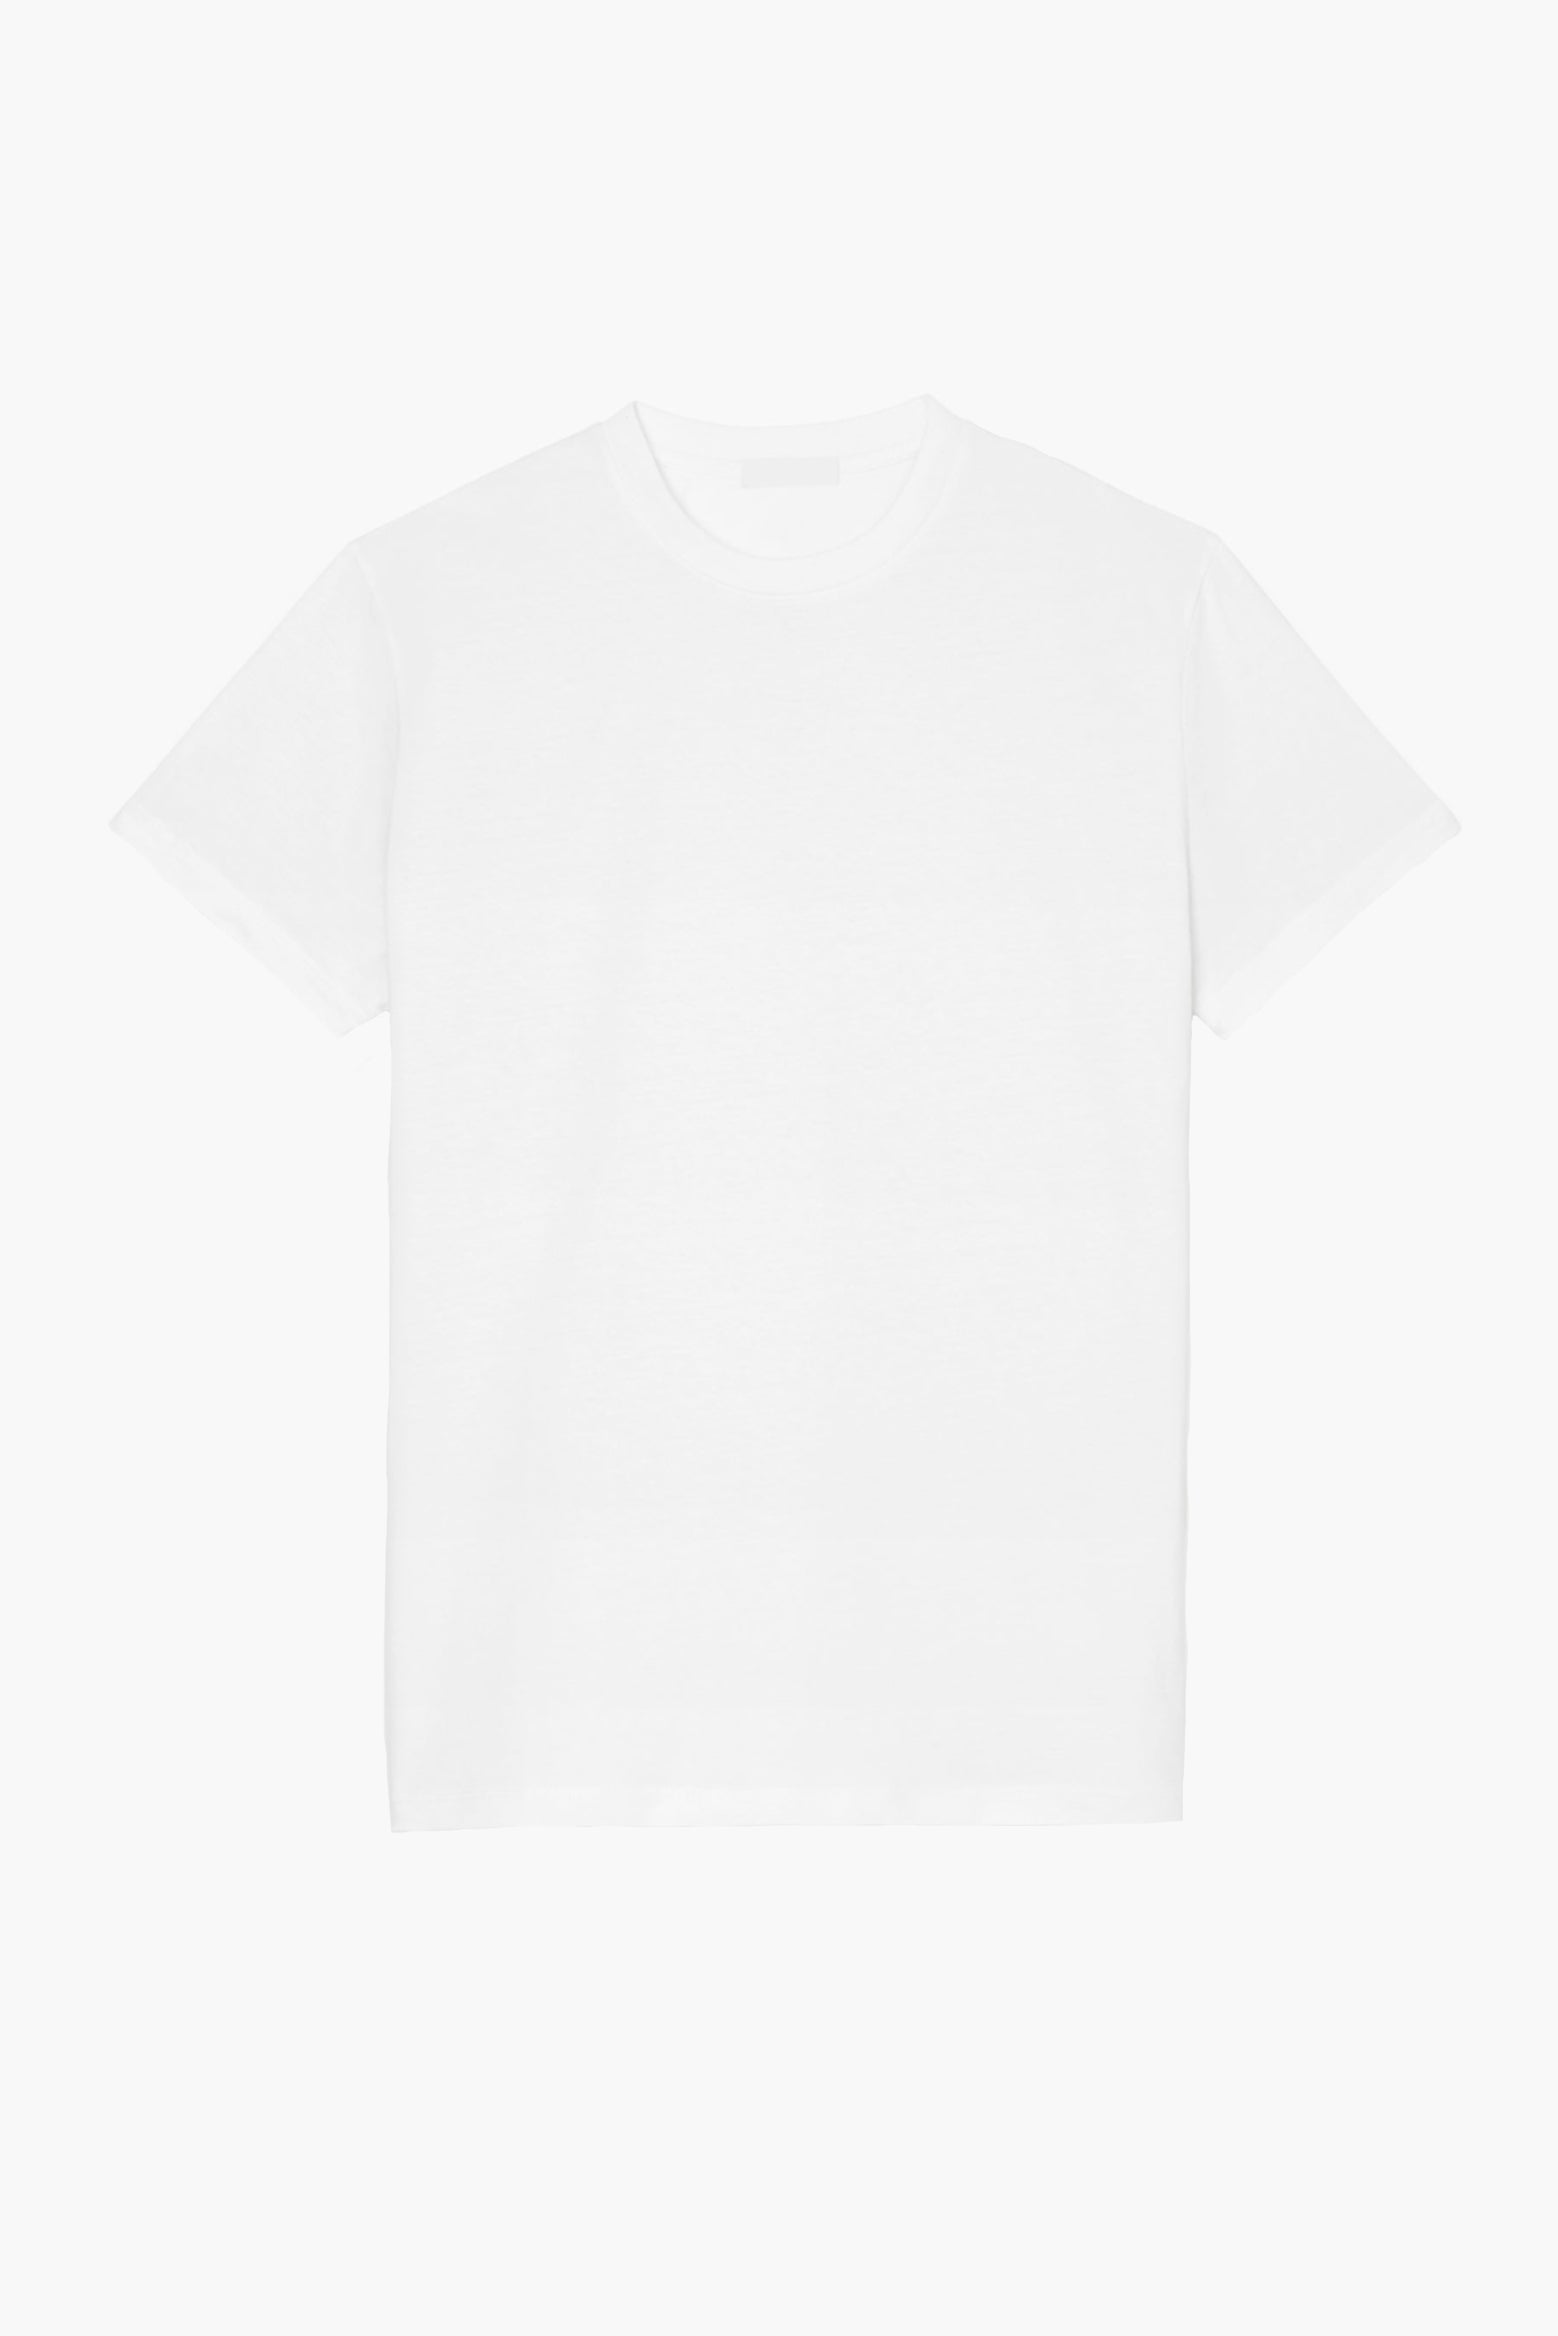 The Wardrobe NYC Classic T Shirt in White available at The New Trend Australia